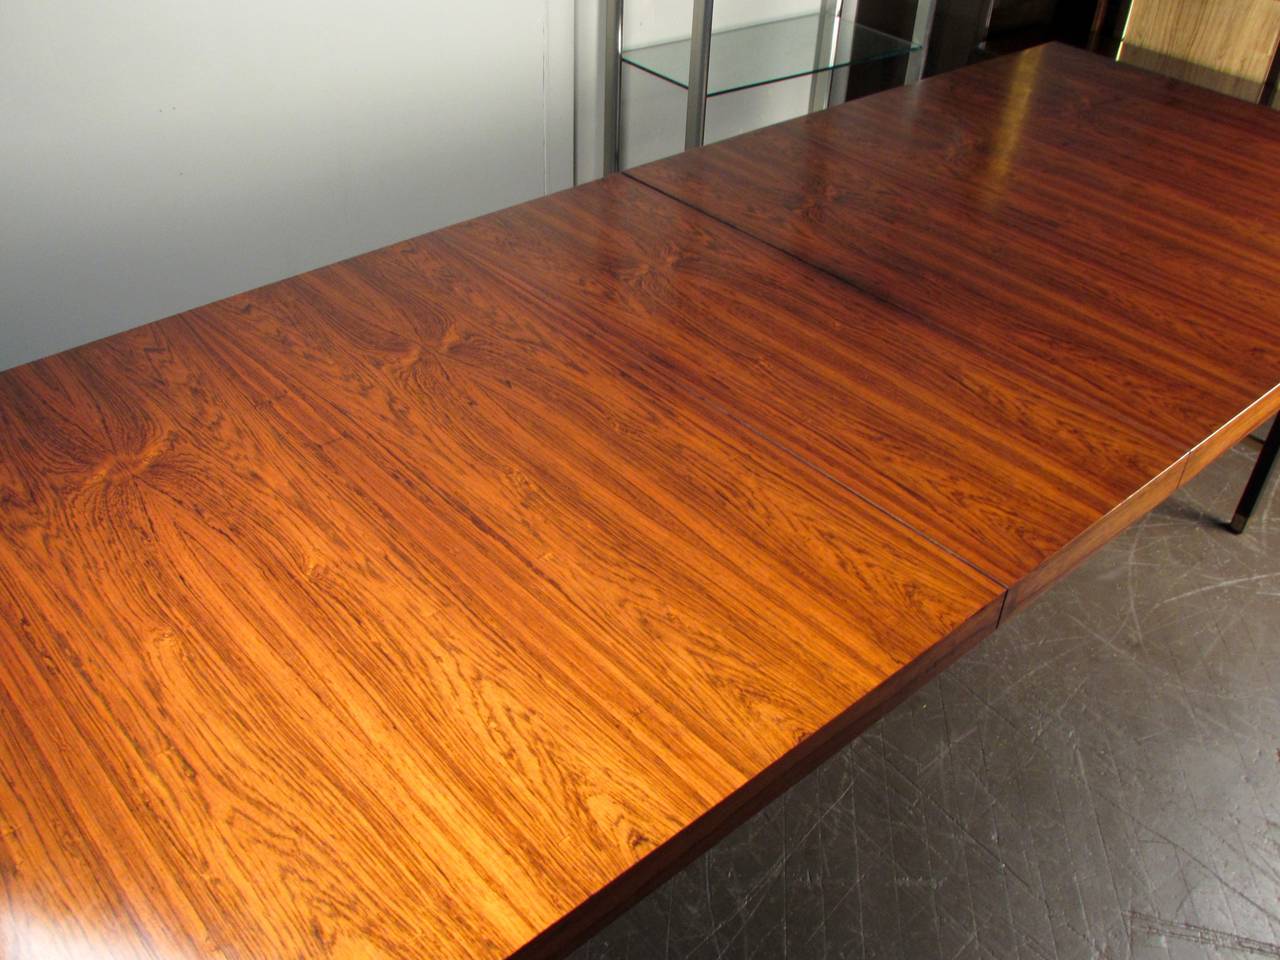 Stunning rosewood dining table with brass stretchers by Harvey Probber Studio, 1965. This table is by far the best quality dining table we have had. Deceivingly heavy. Rosewood grain is absolutely stunning and immaculate. Brass is in excellent